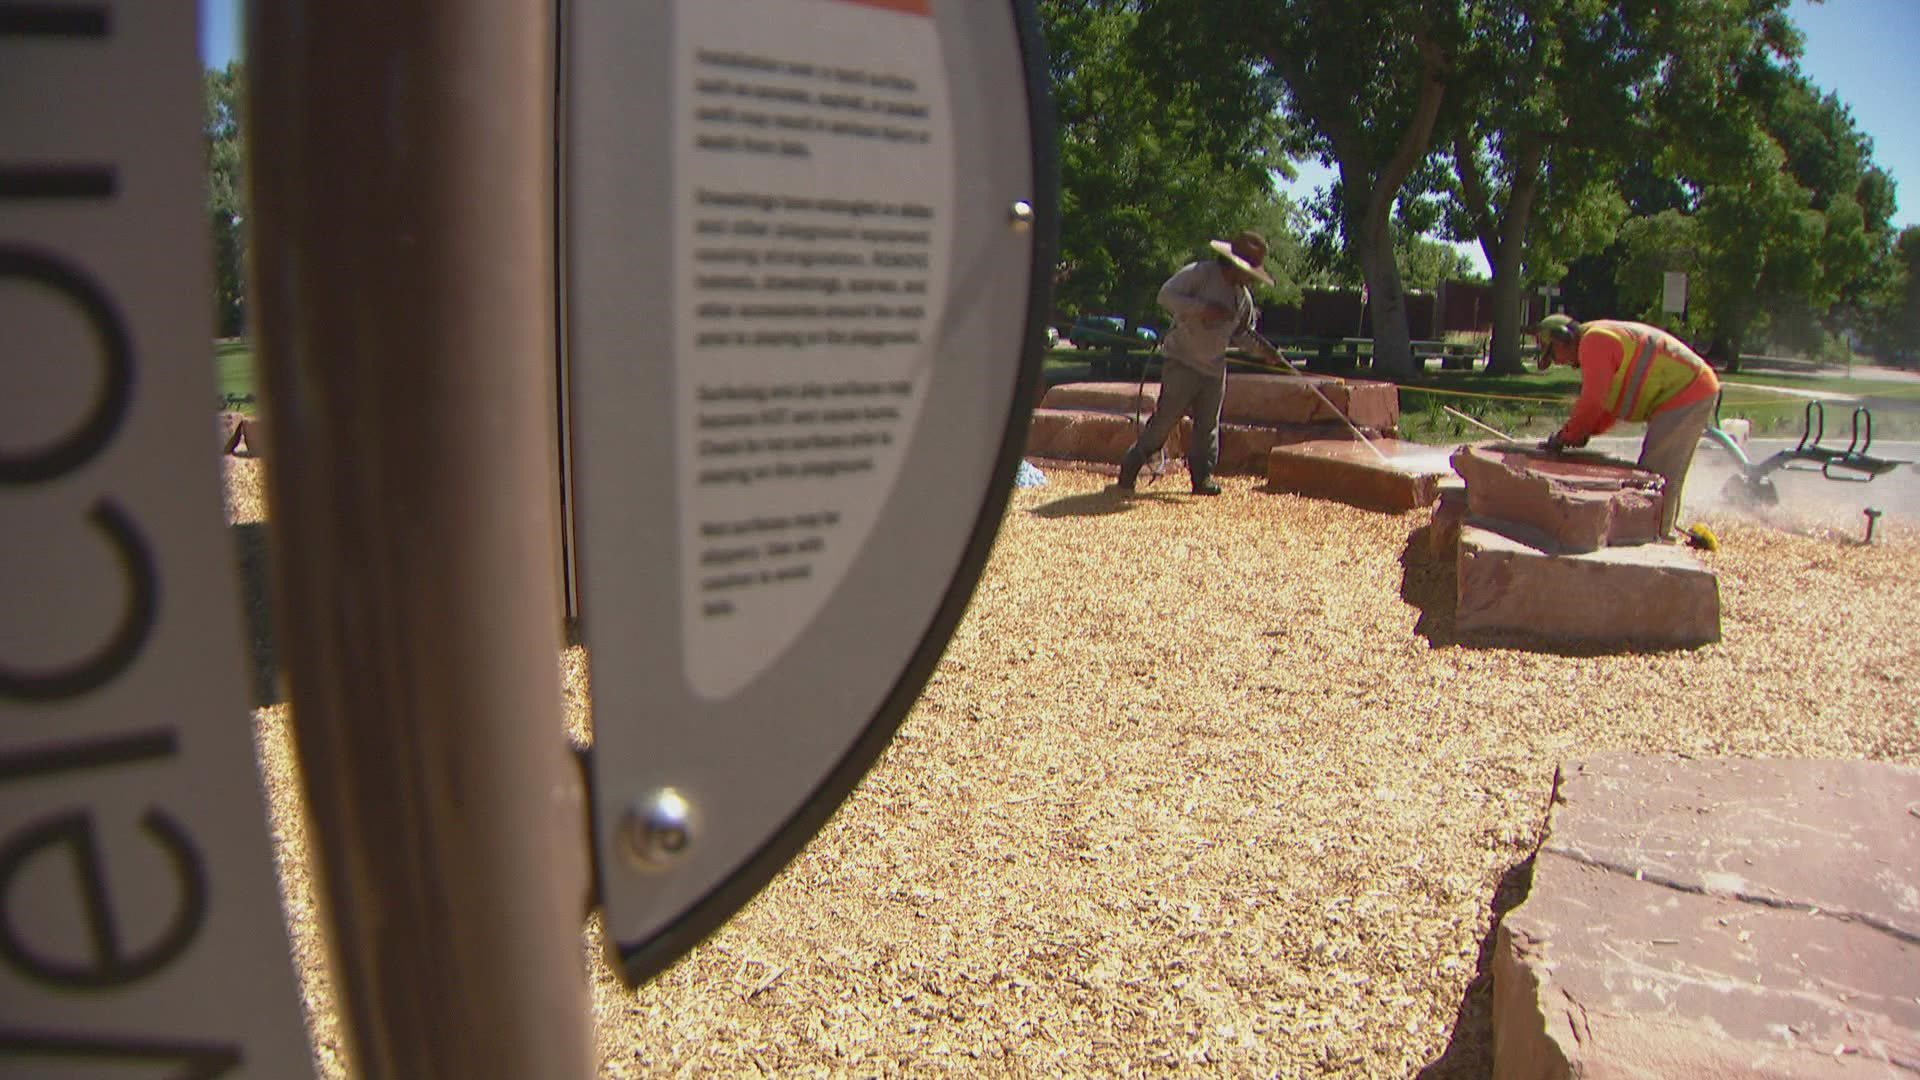 This morning crews found racial and homophobic slurs tagged on City Park's brand-new playground.